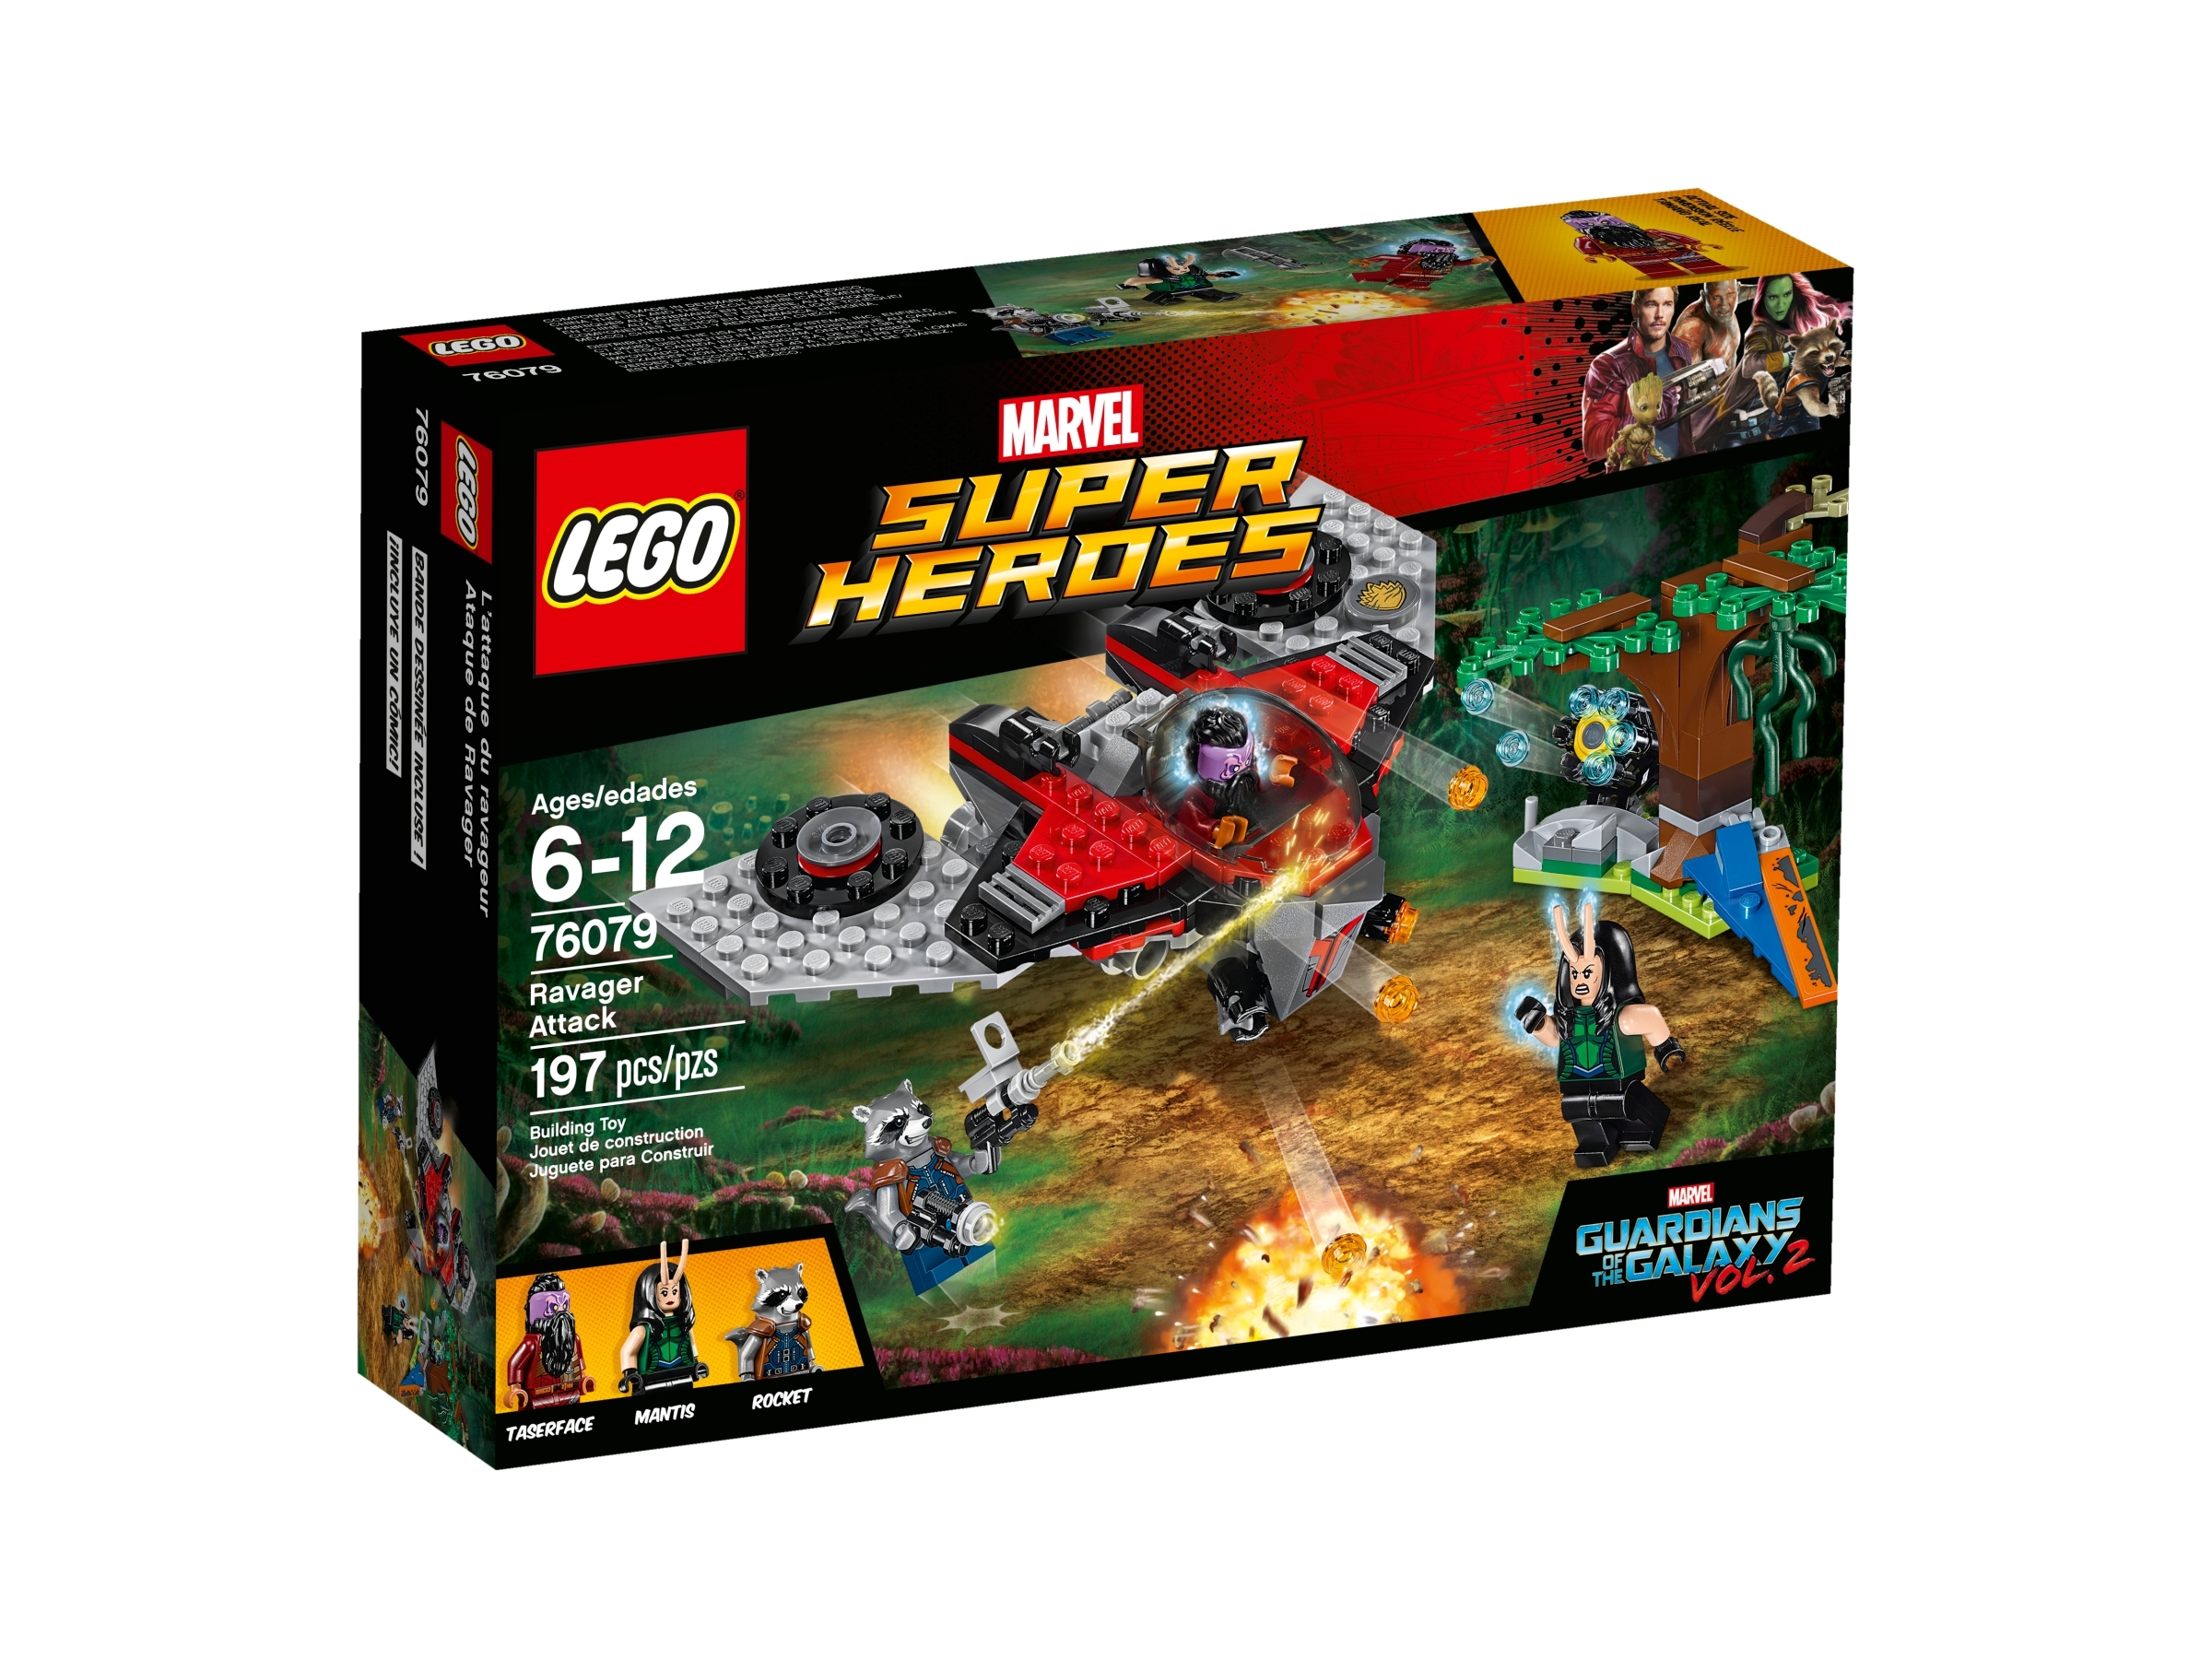 Guardians of the Galaxy Volume 2-NEUF Lego Super Heroes 76079 